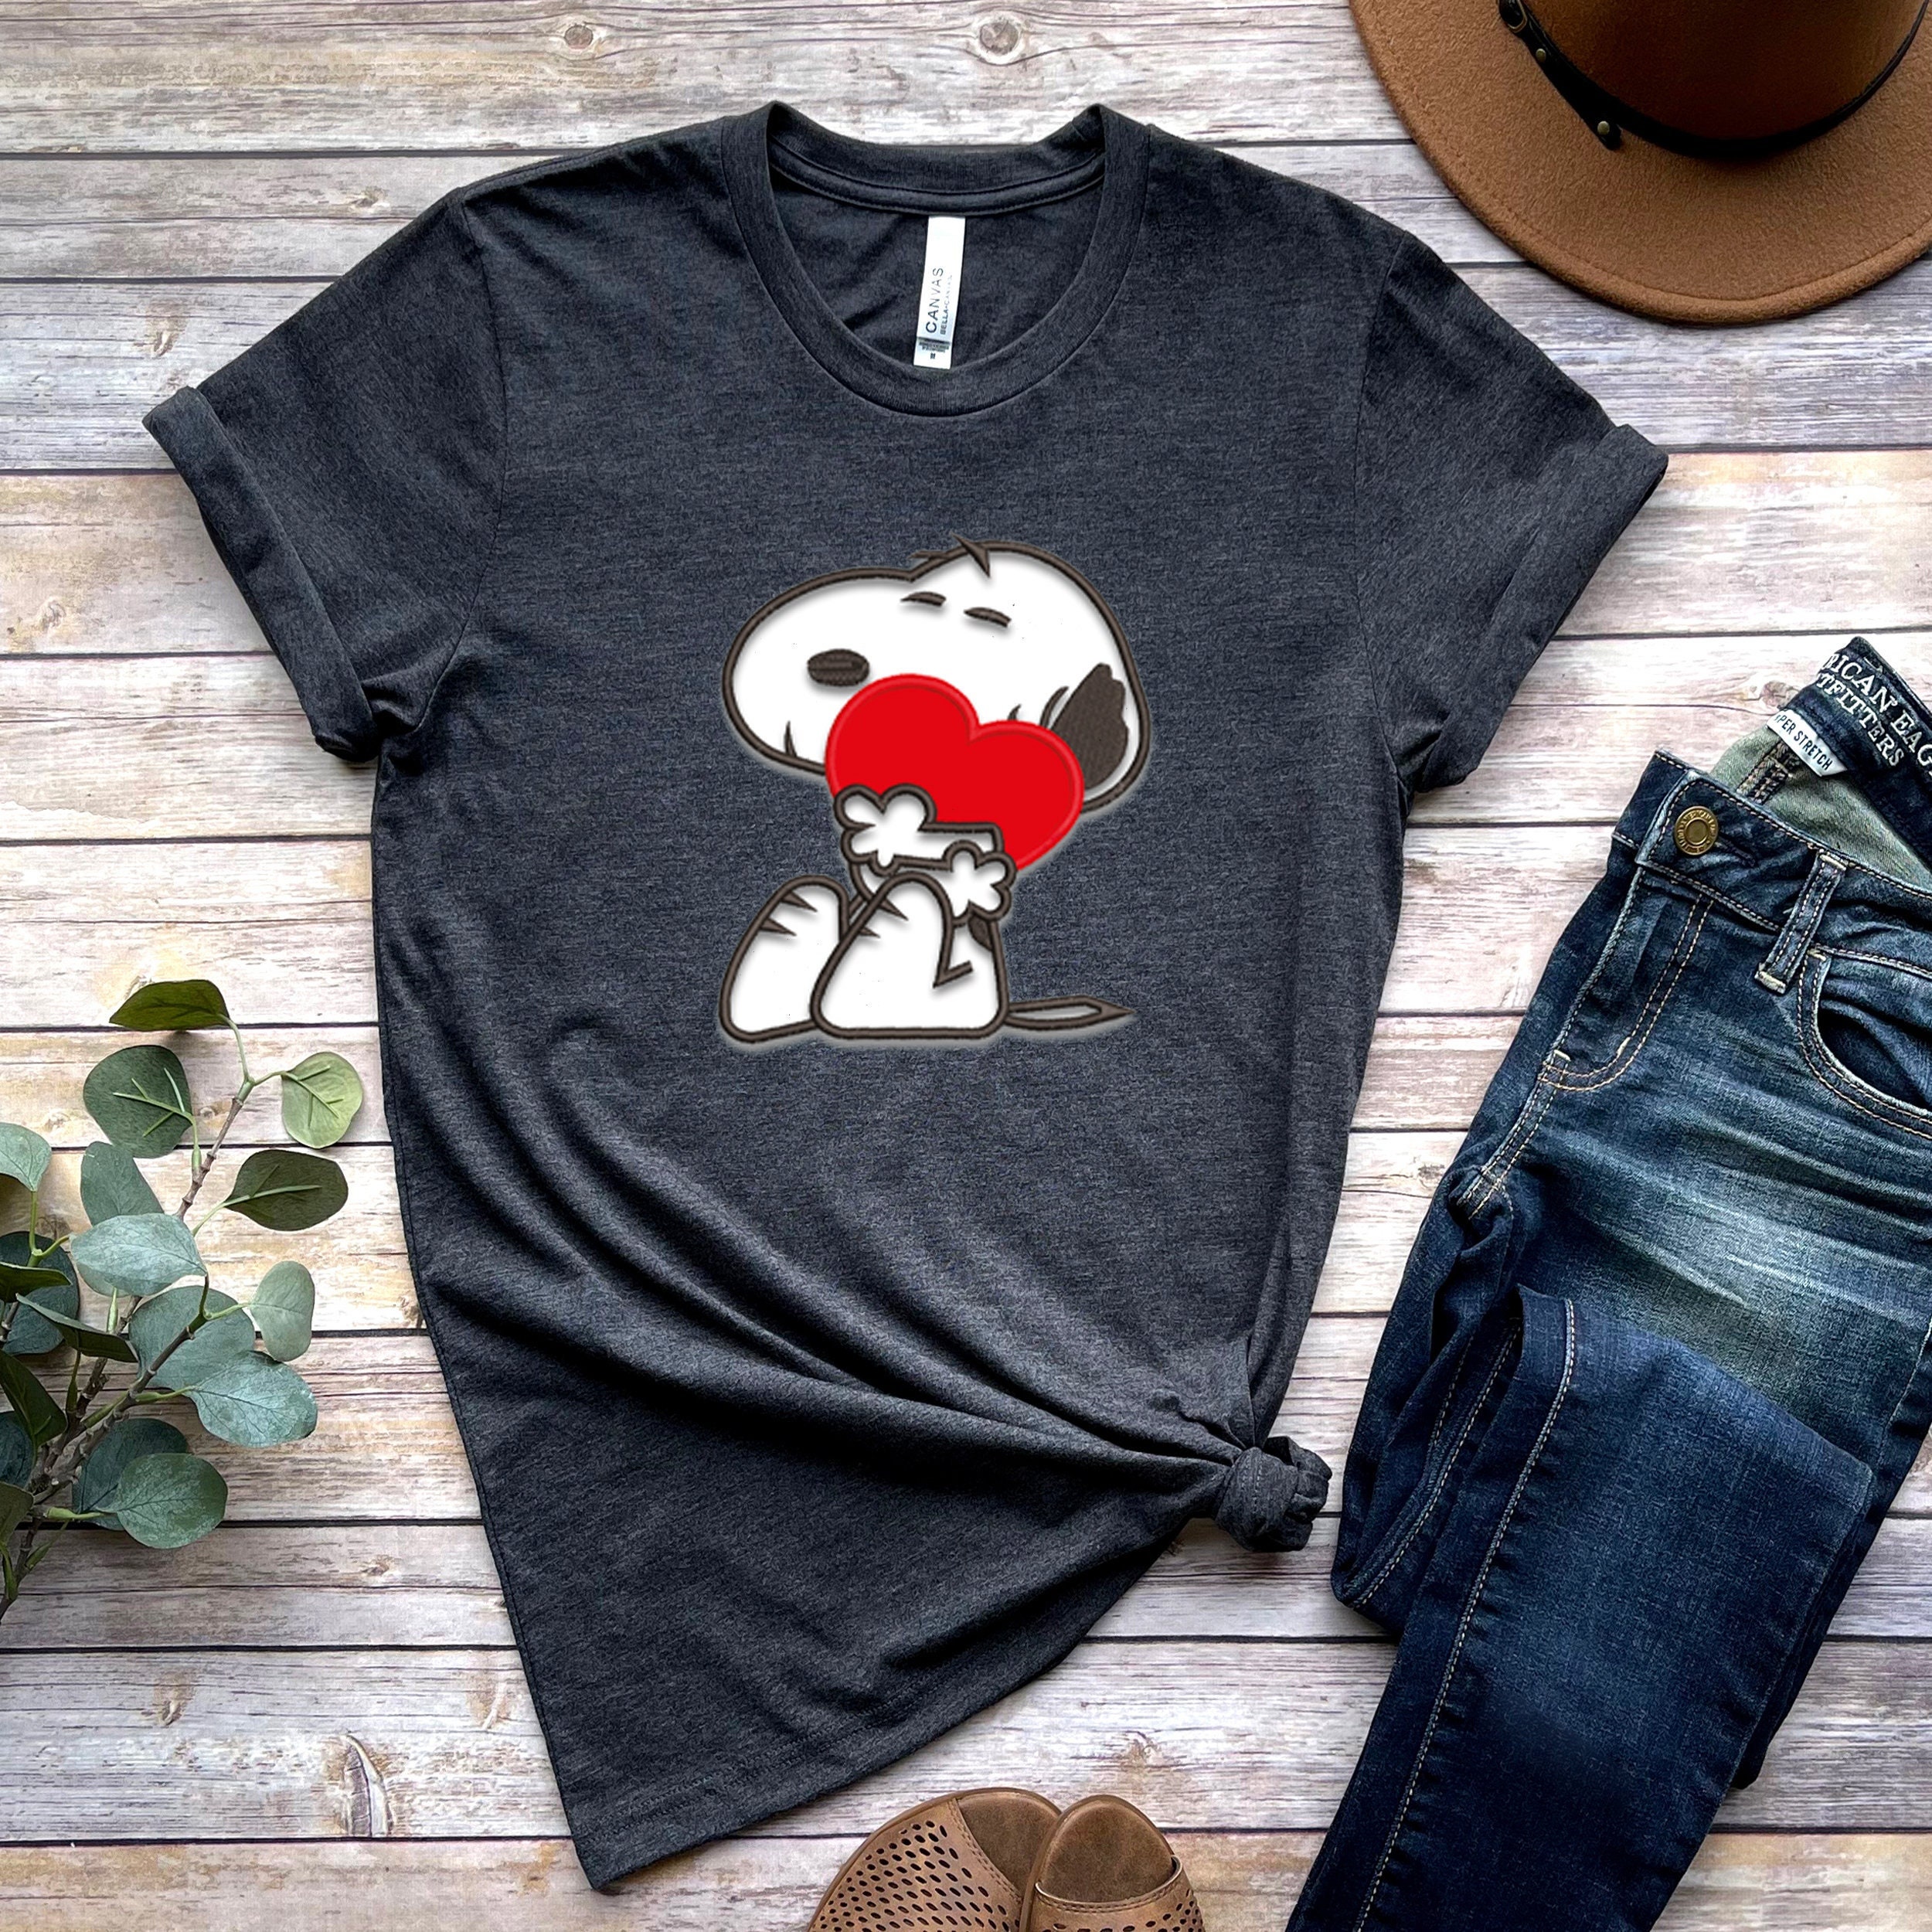 Discover Hugging Snoopy Valentine Shirt, Cute Valentine Shirt, Snoopy Valentine's Day Love Hearts Shirt